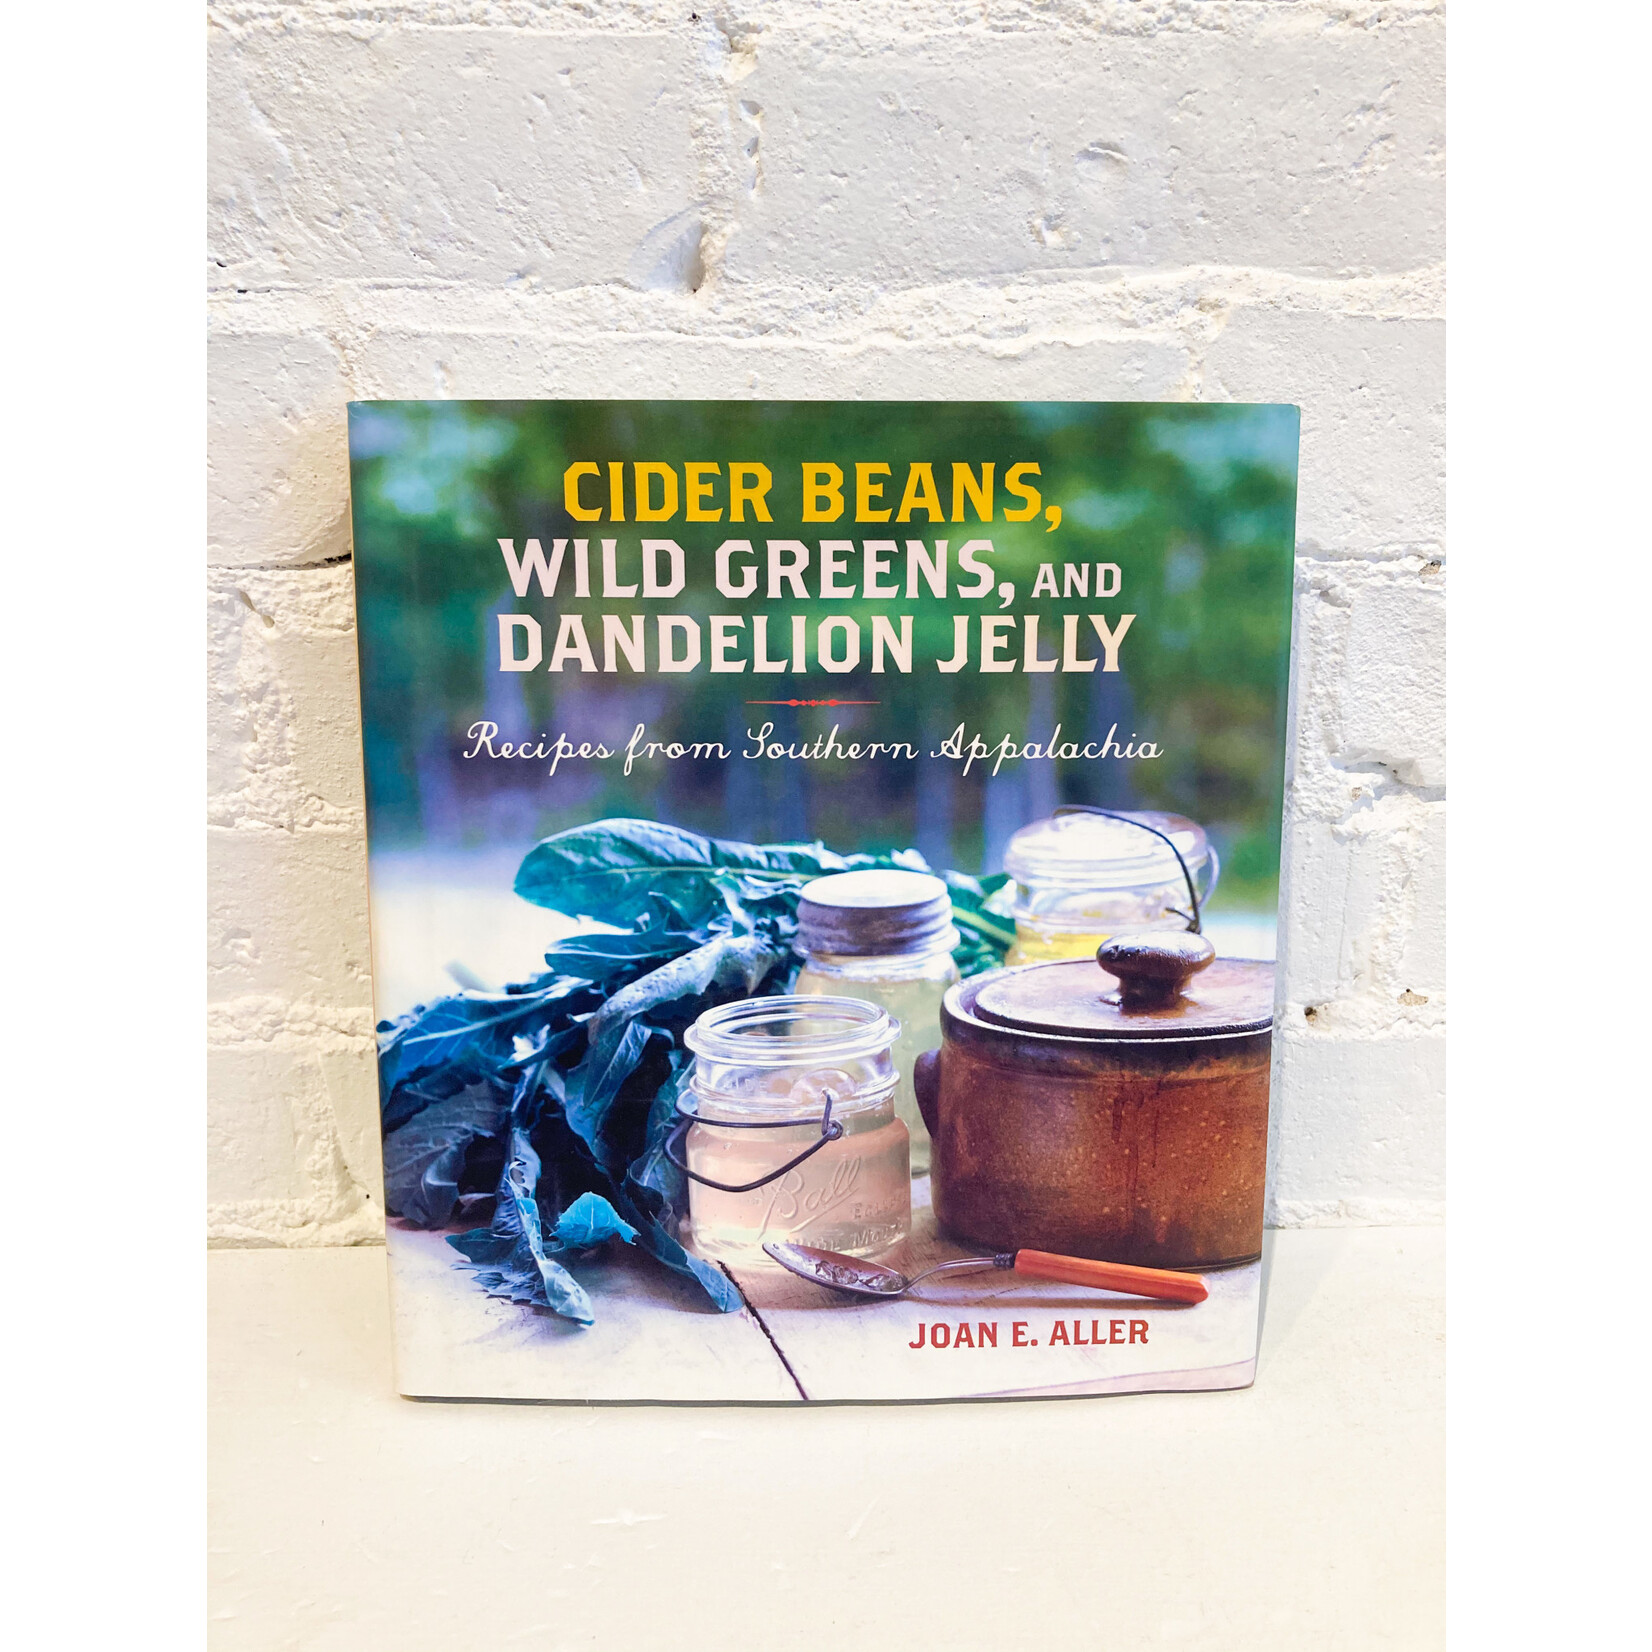 Cider Beans, Wild Greens, and Dandelion Jelly by Joan E. Aller